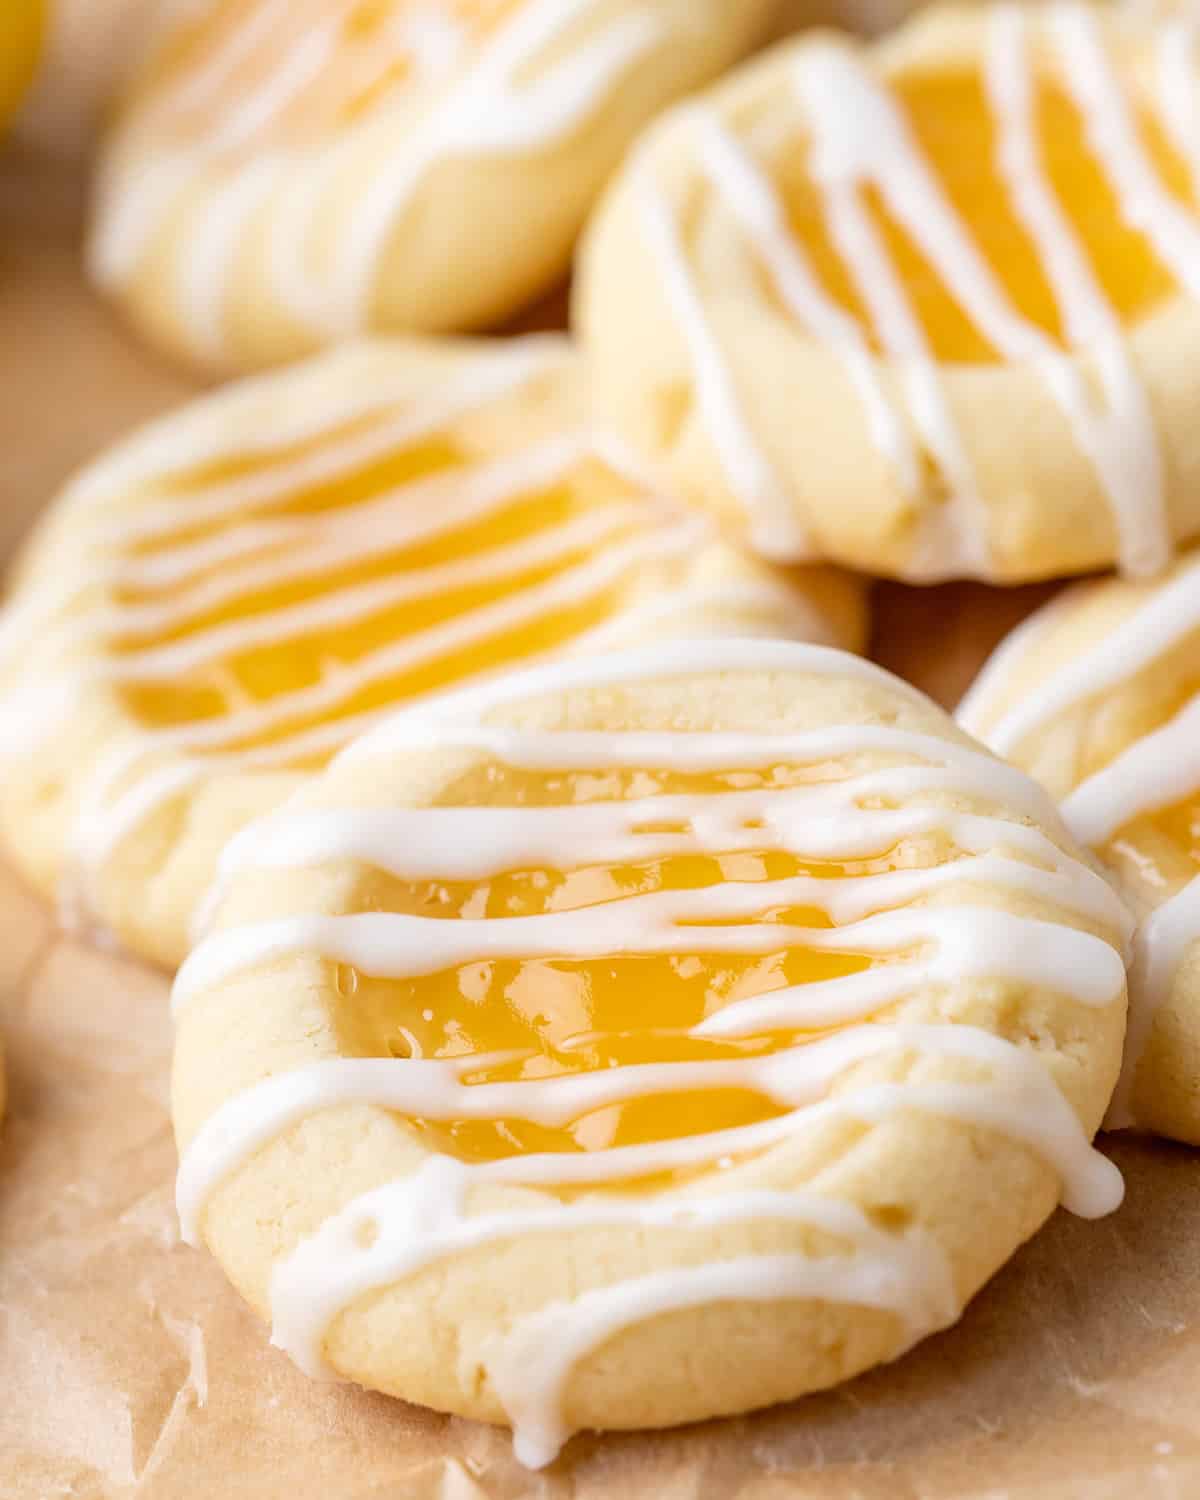 5 Lemon Curd Cookies with glaze drizzled on top